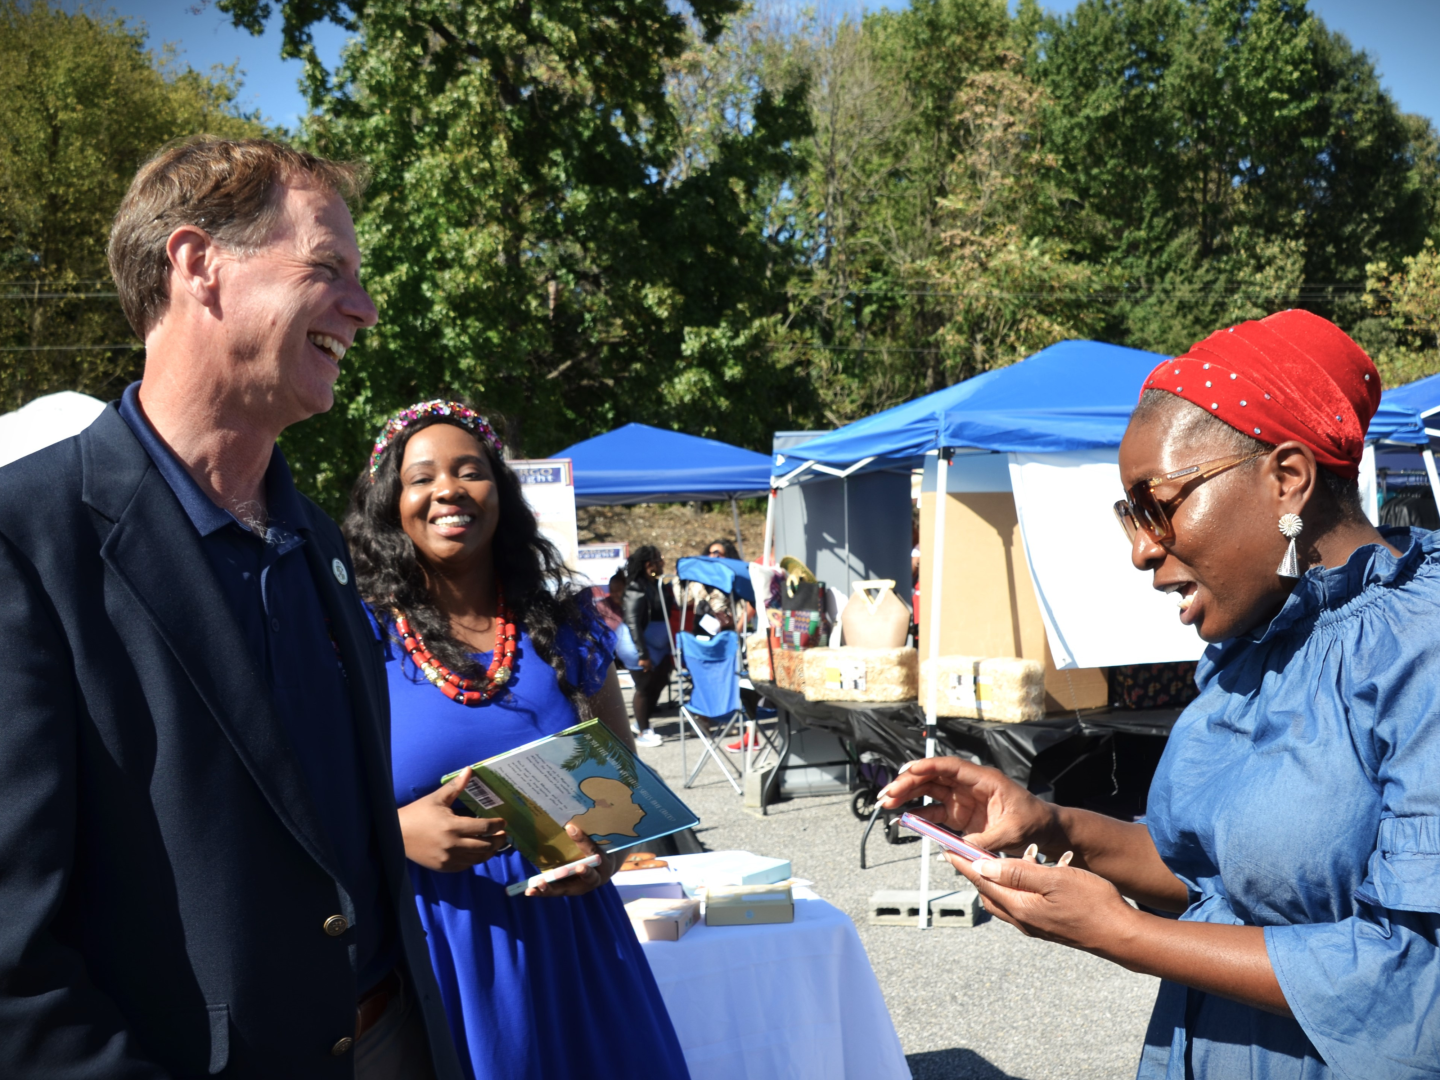 County Executive Pittman at a community event